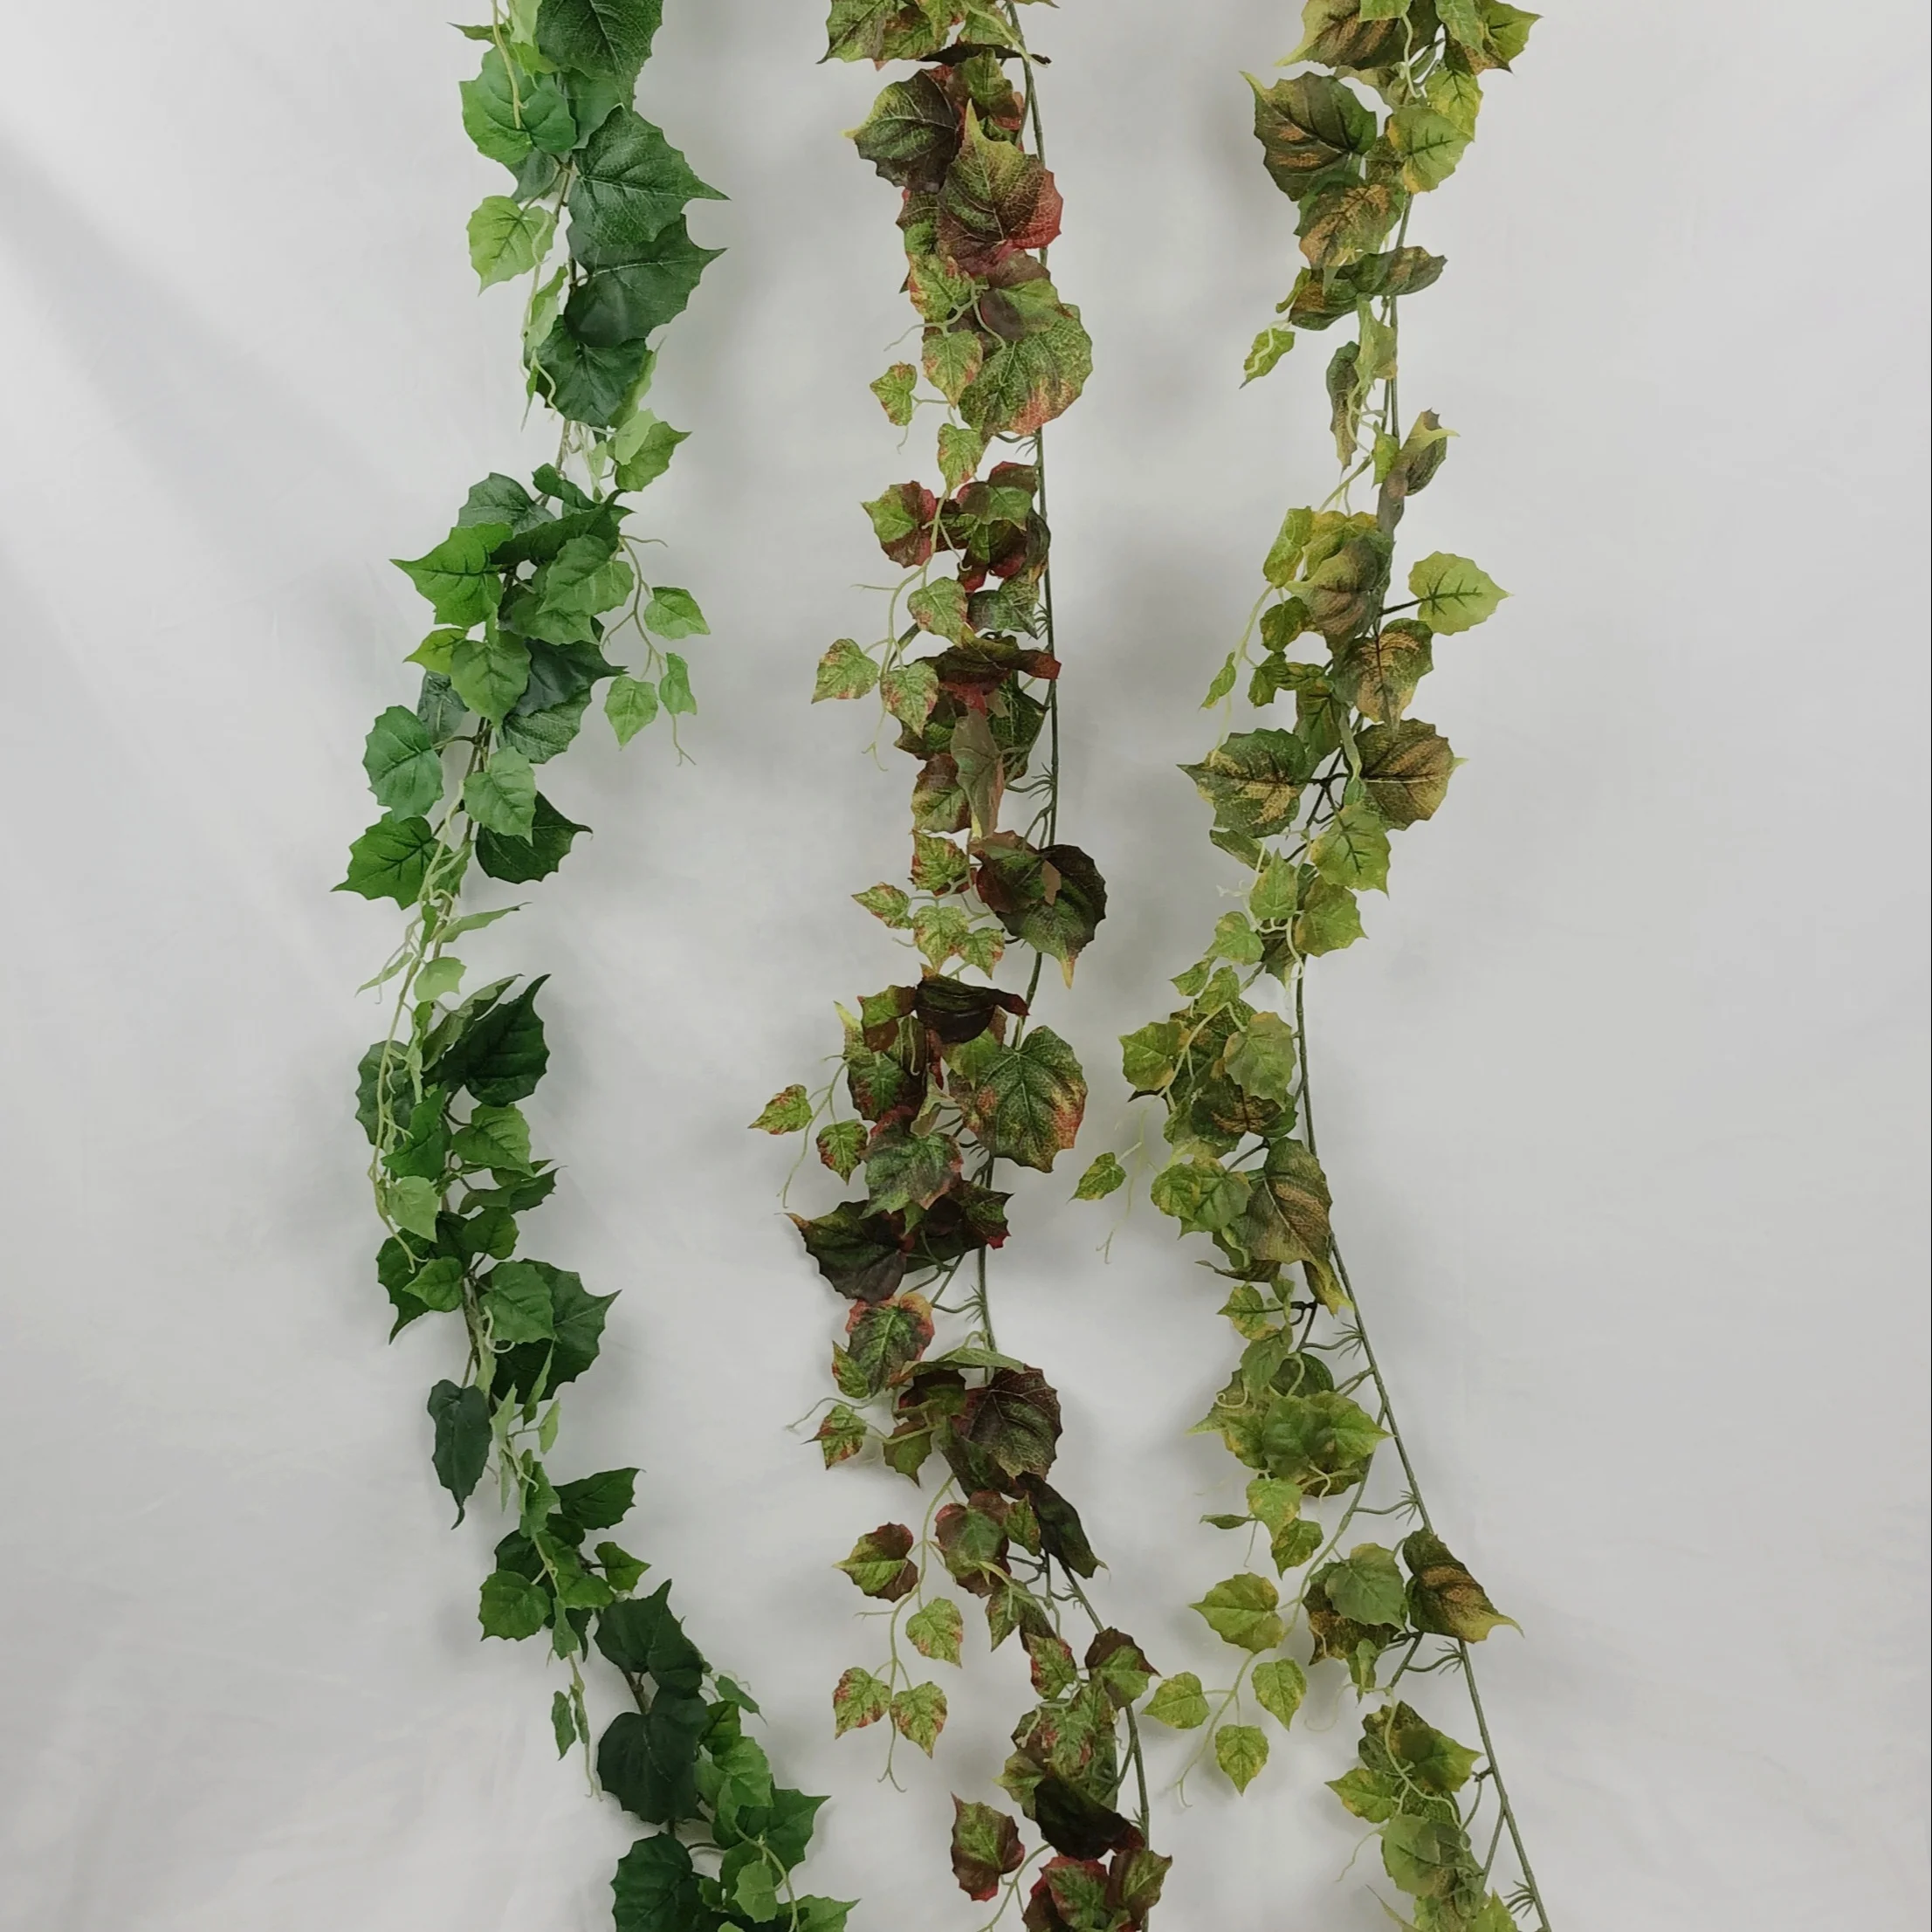 

230cm long high quality greenery wall hanging artificial plastic creepers leaf garland hanging plant, Green color and red edge